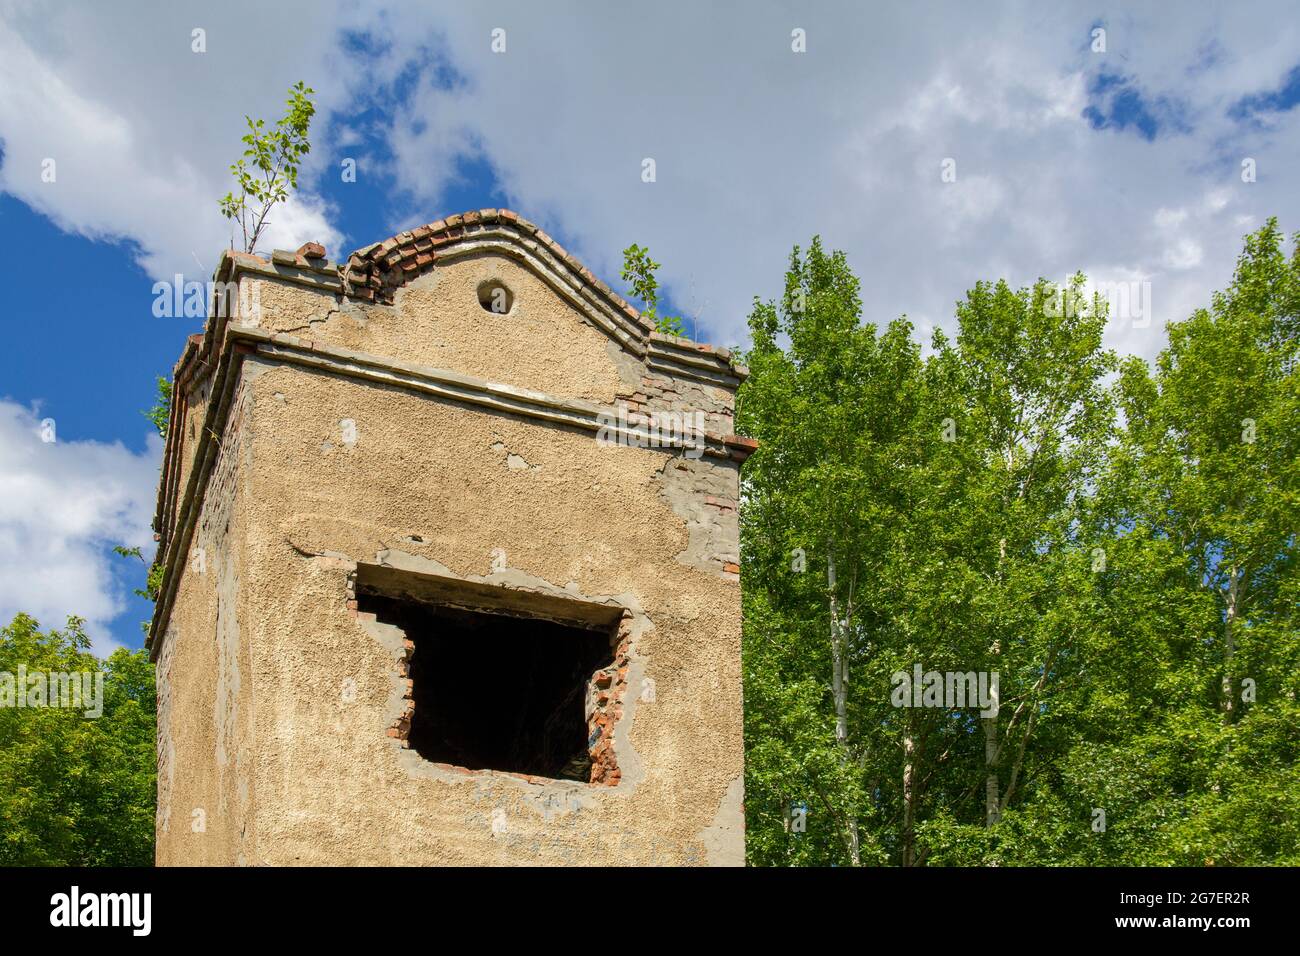 Ancient dilapidated tower in a modern city park. Stock Photo